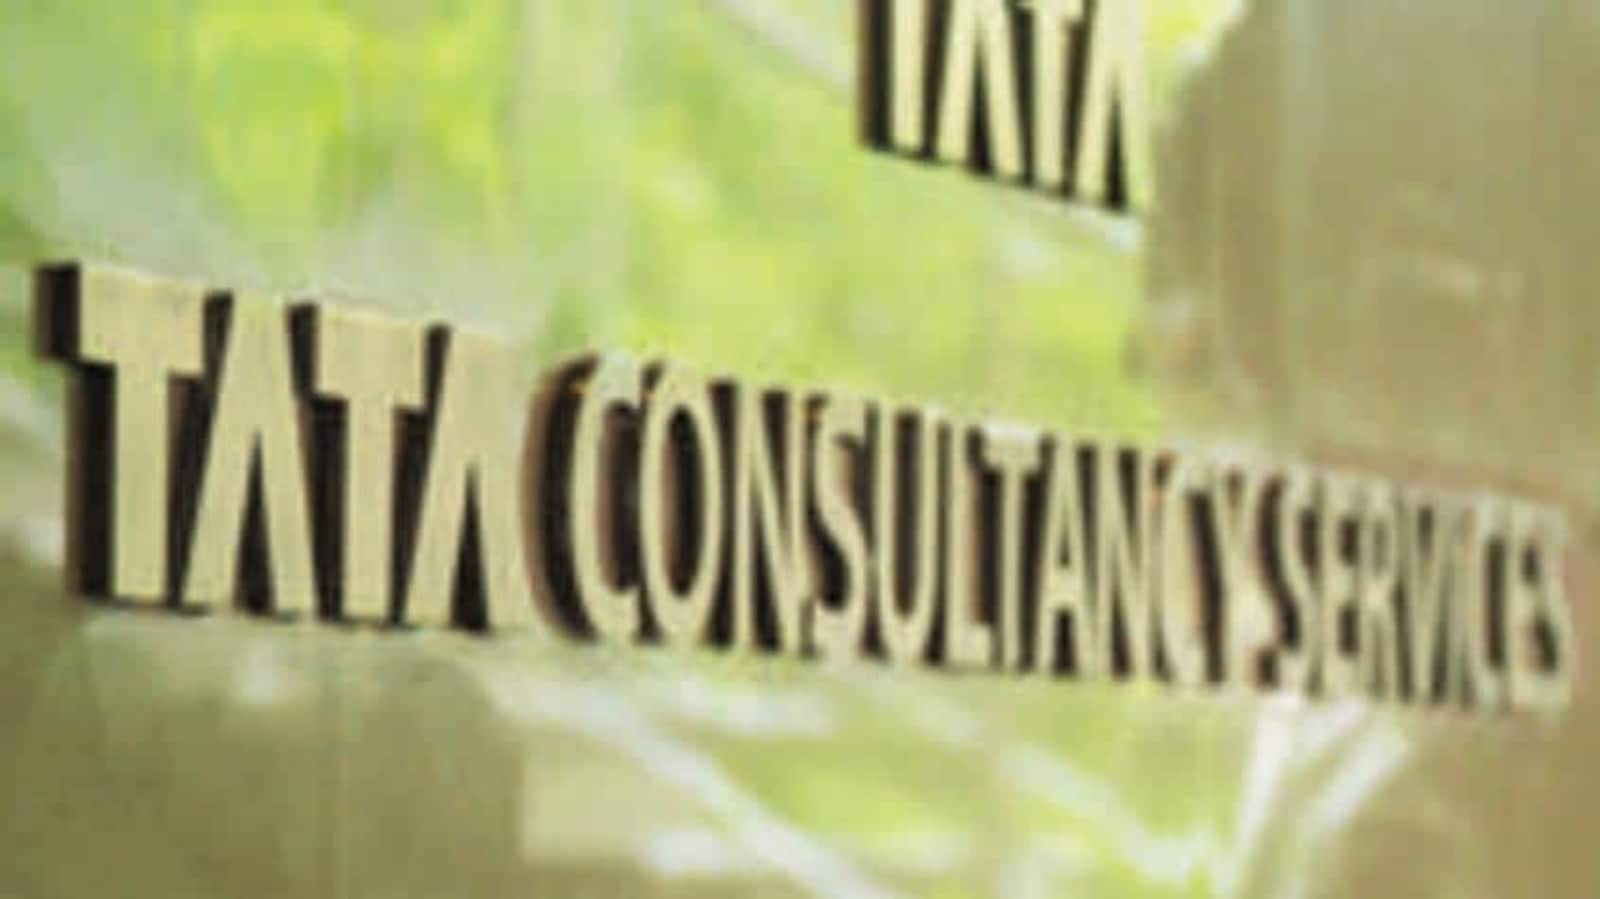 On moonlighting, TCS official says companies should show ‘empathy’ for employees